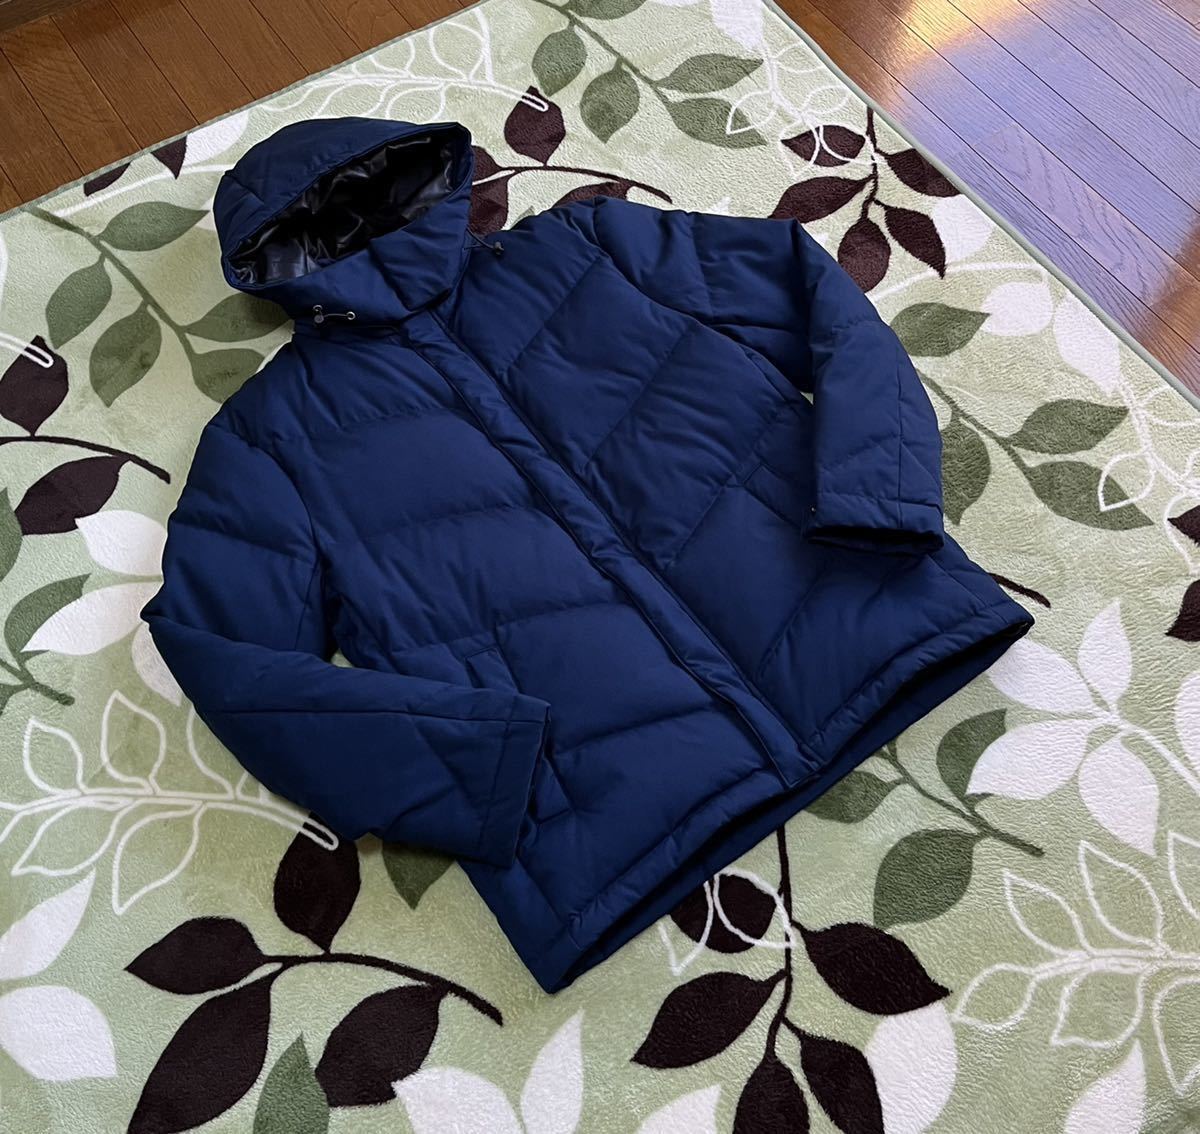  beautiful goods MK Michel Klein Homme with a hood . down jacket 52 navy 